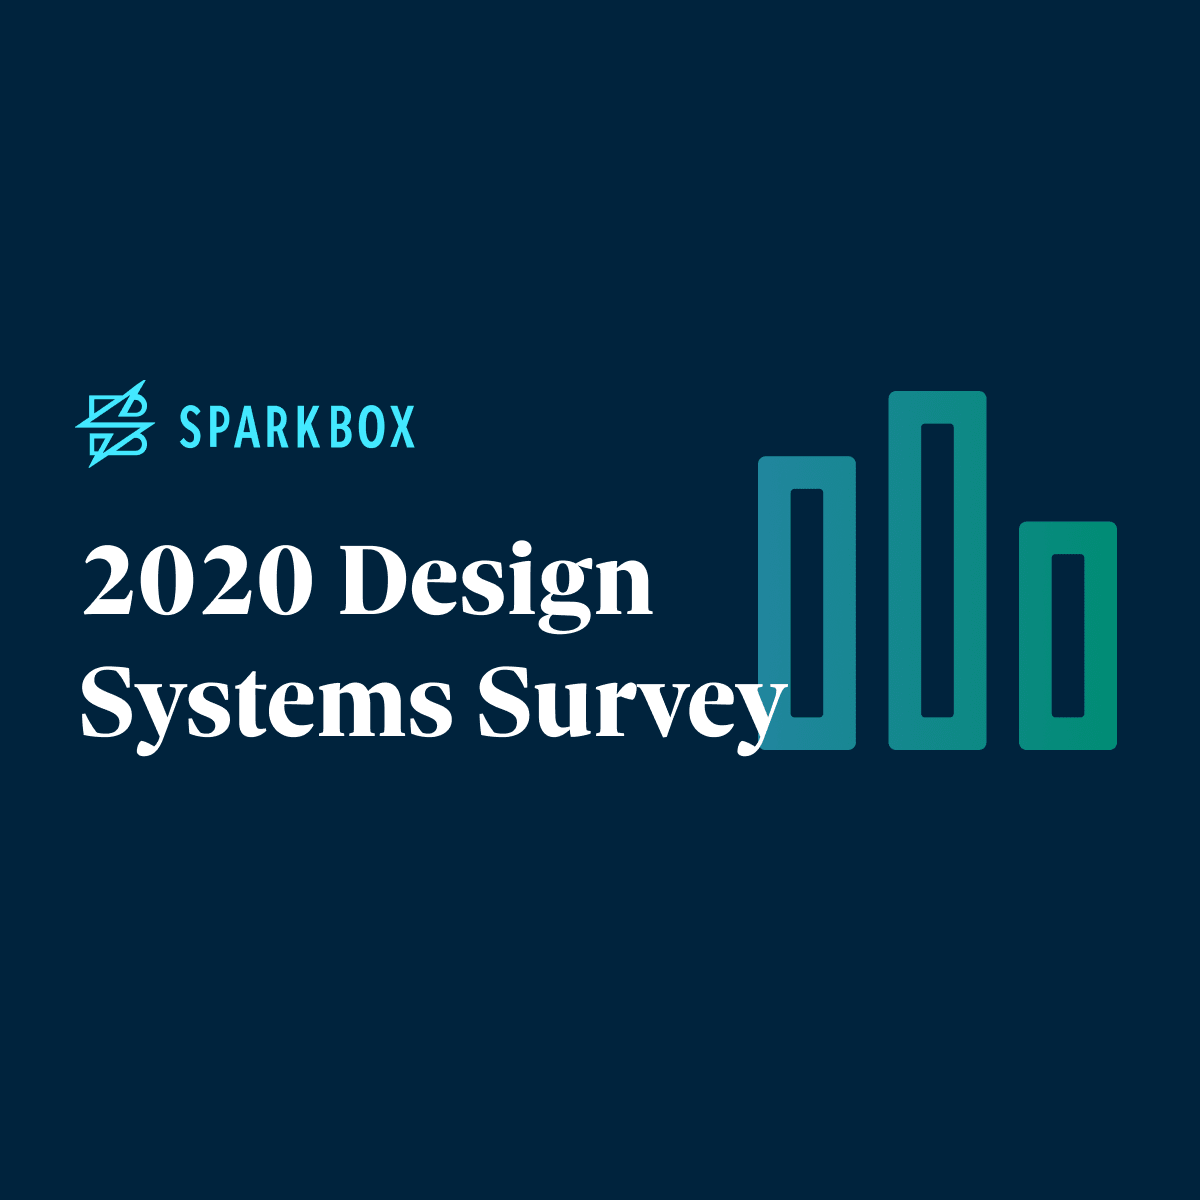 The 2020 Design Systems Survey by Sparkbox